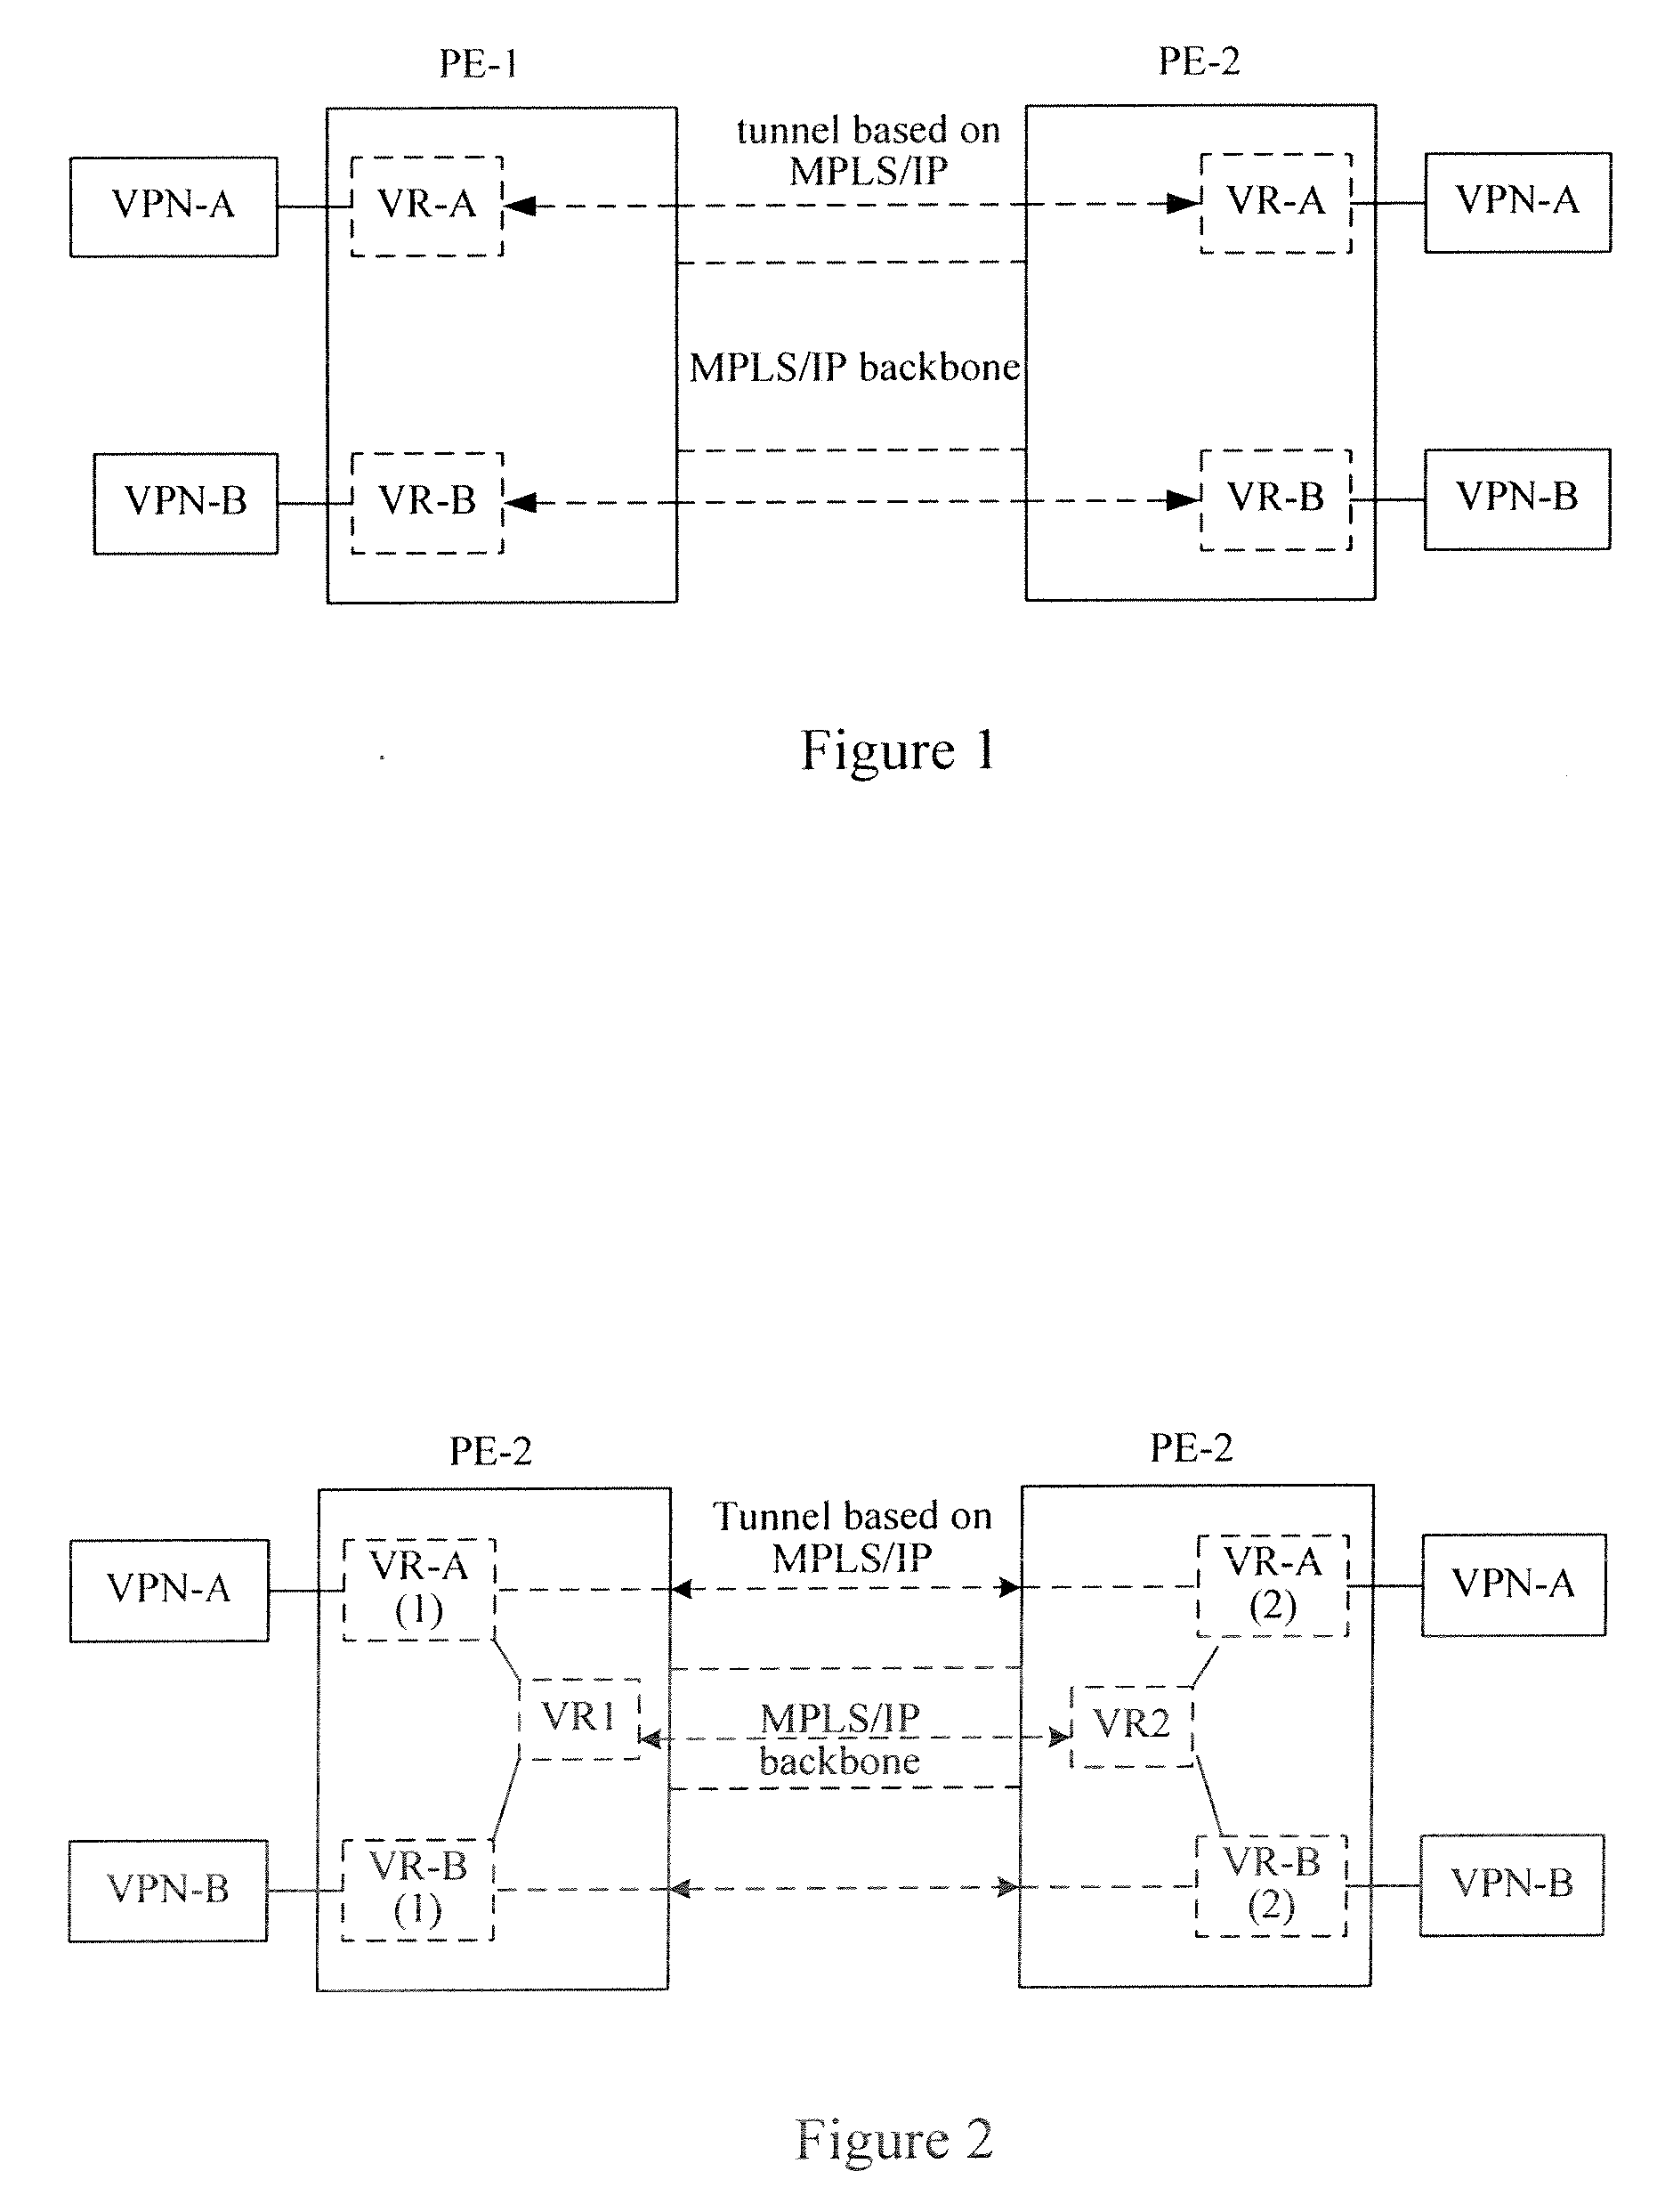 Method for Implementing Multicast in Virtual Router-Based Virtual Private Network